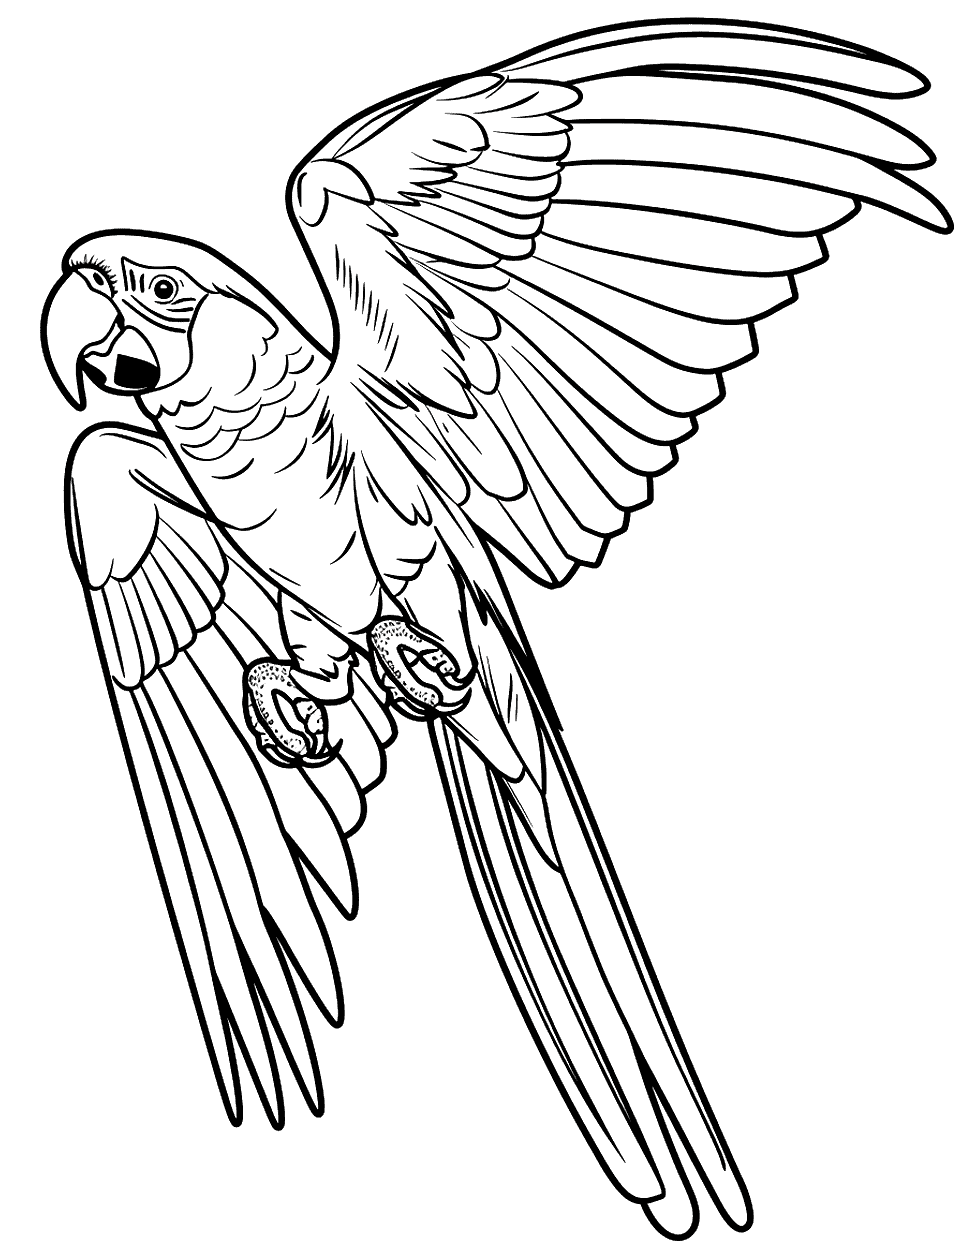 Macaw Parrot in Flight Coloring Page - A dynamic scene of a macaw parrot soaring high with wings fully spread.